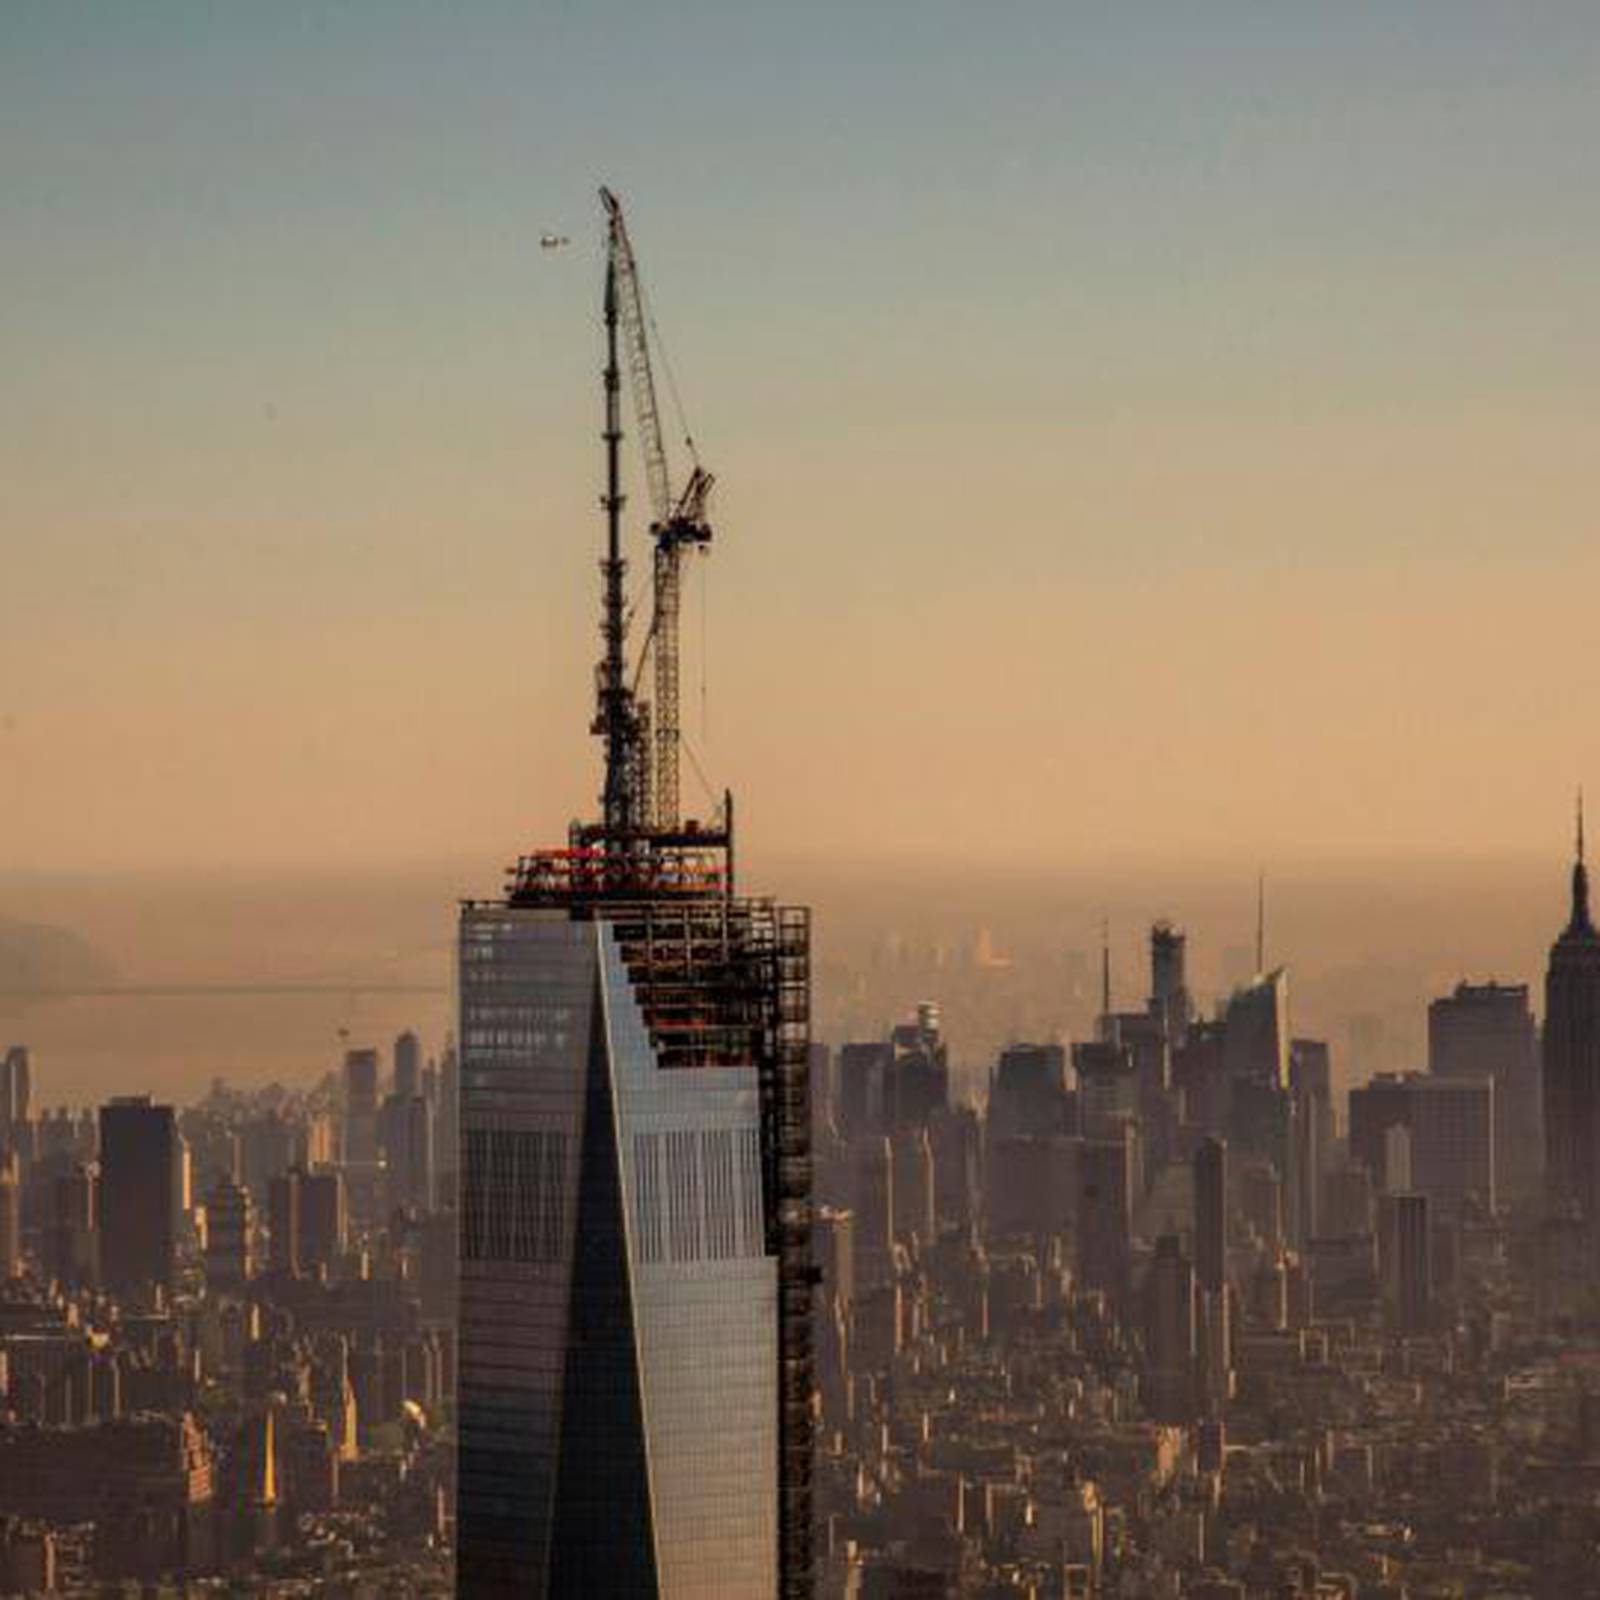 Top 10 Secrets of One World Trade Center - Untapped New York